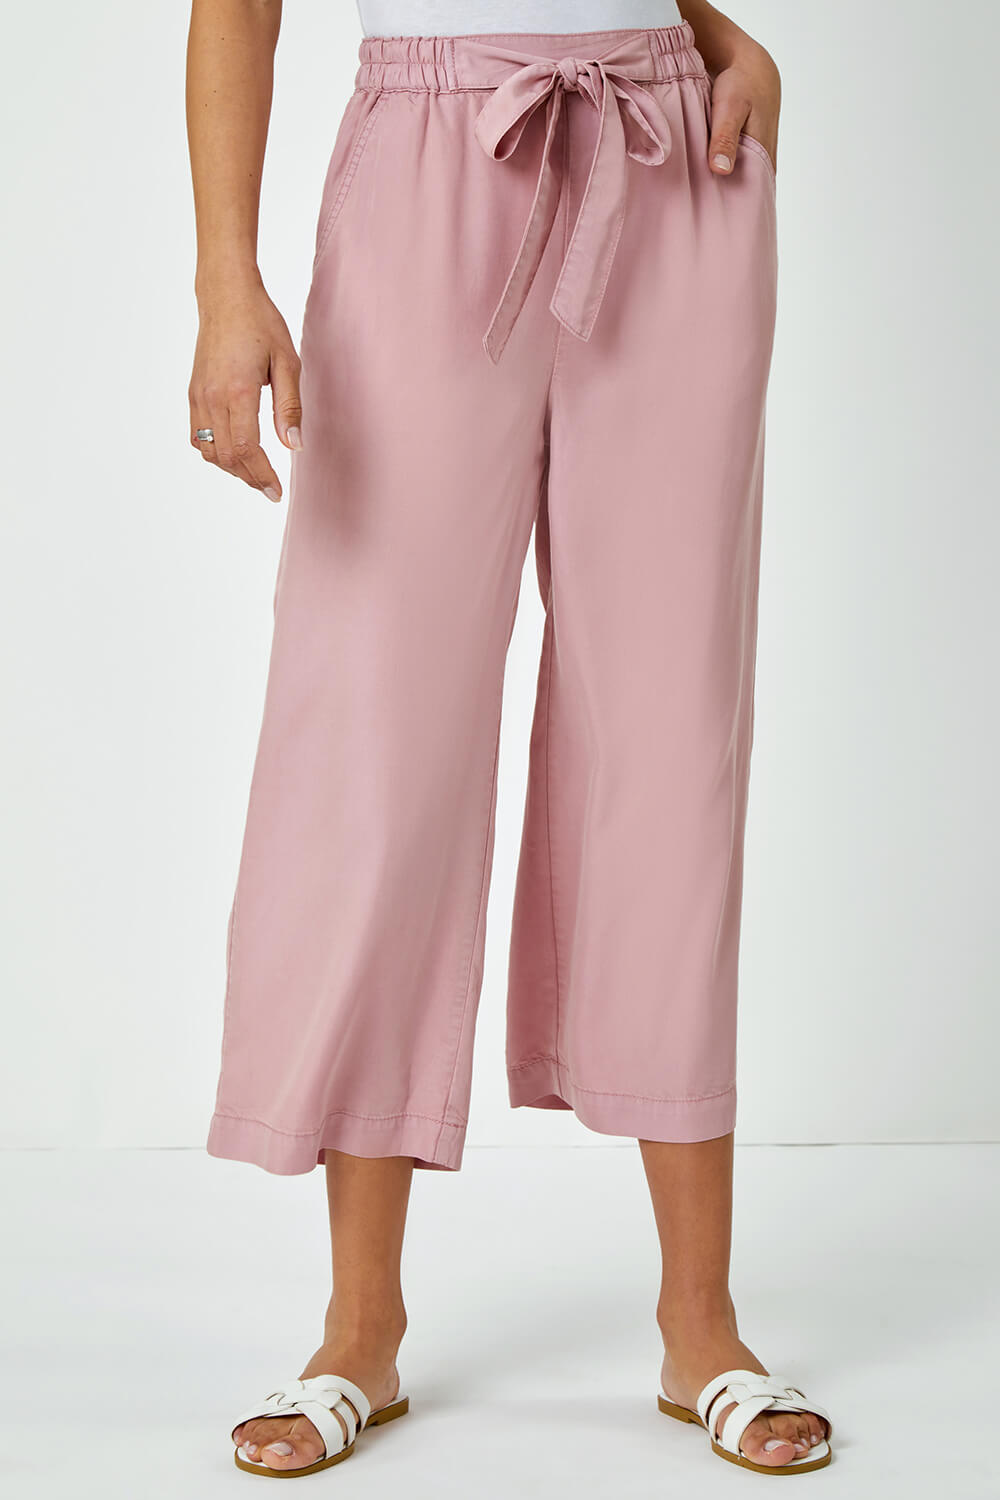 Rose Tie Detail Stretch Waist Culottes, Image 5 of 5